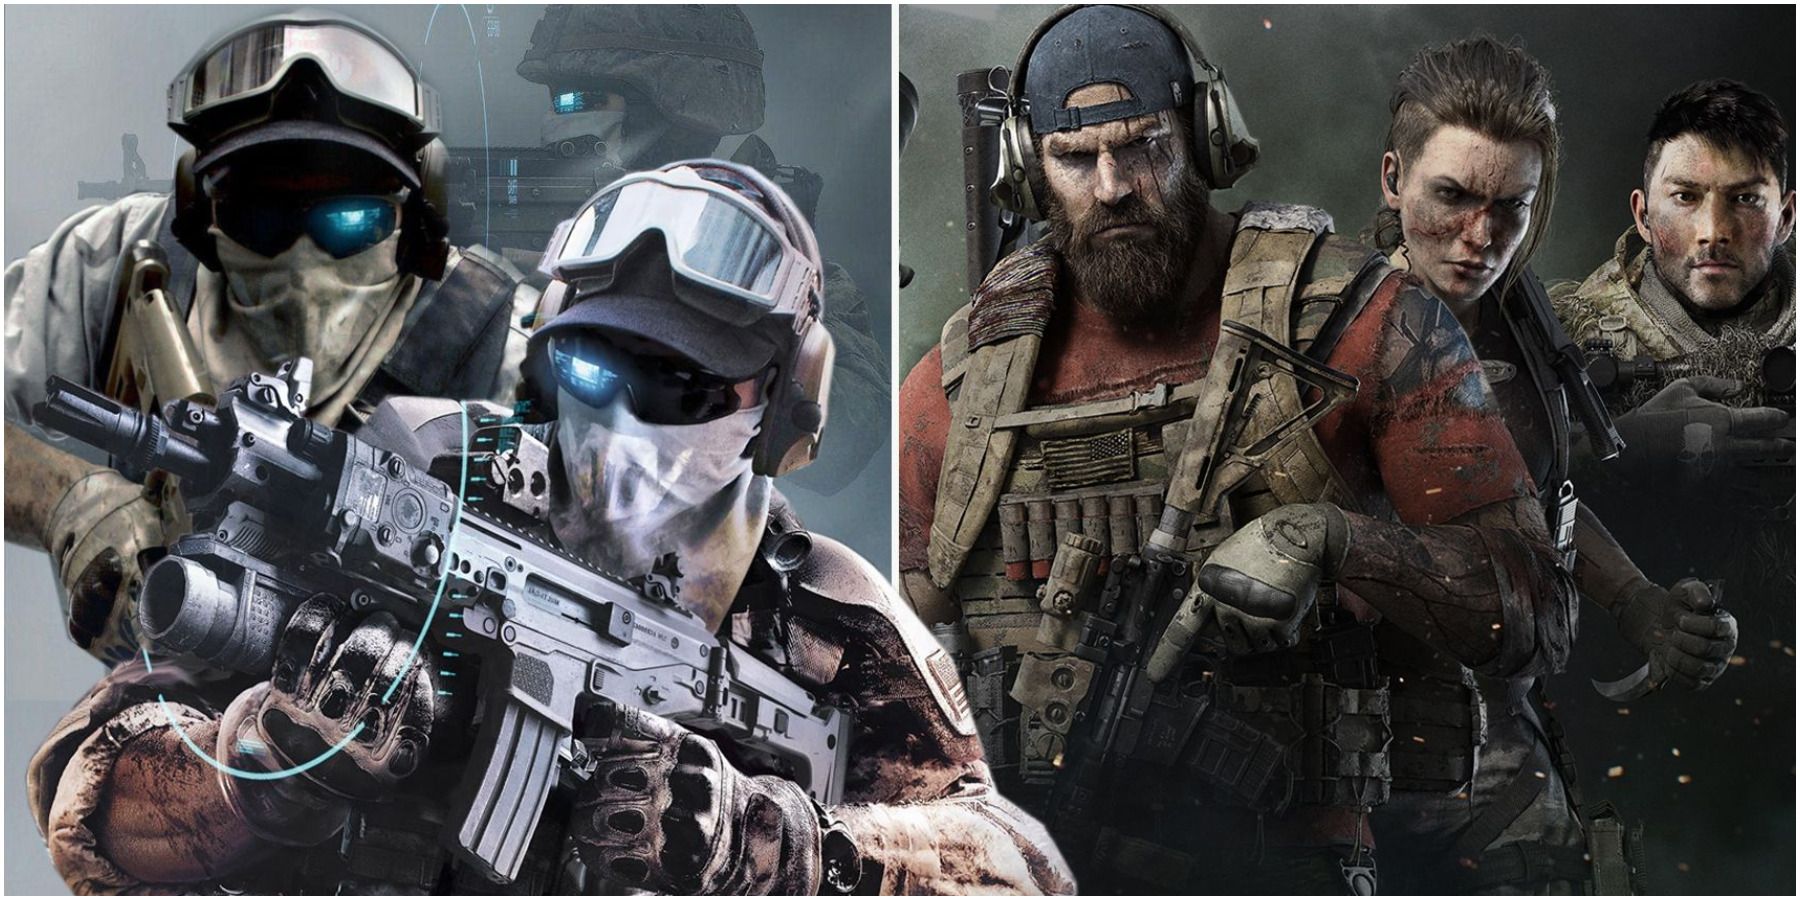 ghost recon games ranked reddit